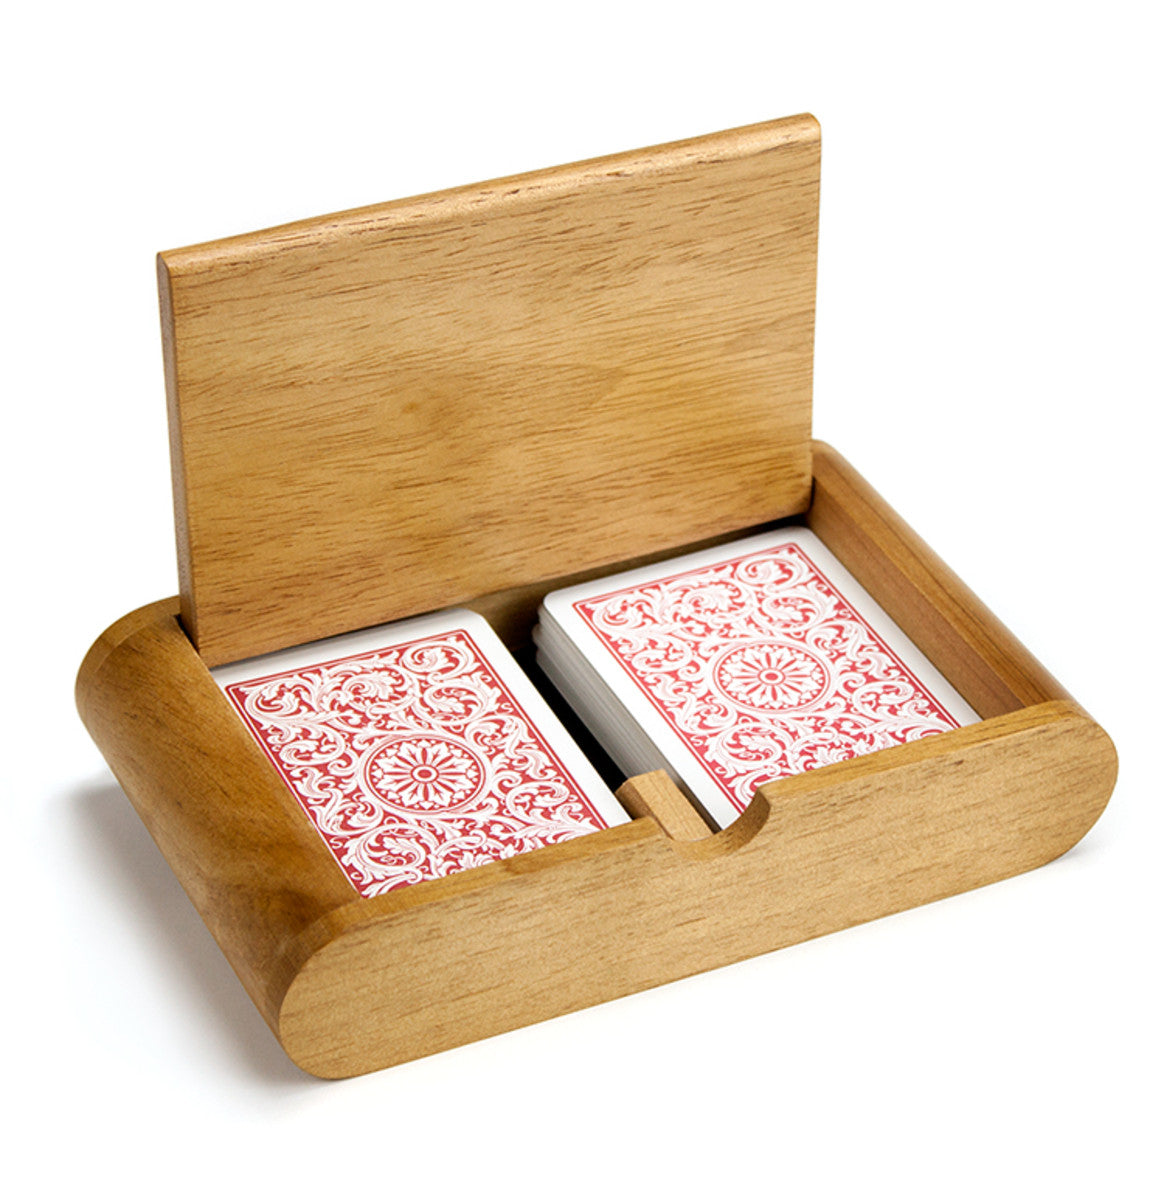 Copag Wooden Card Storage Box for Poker and Bridge Cards